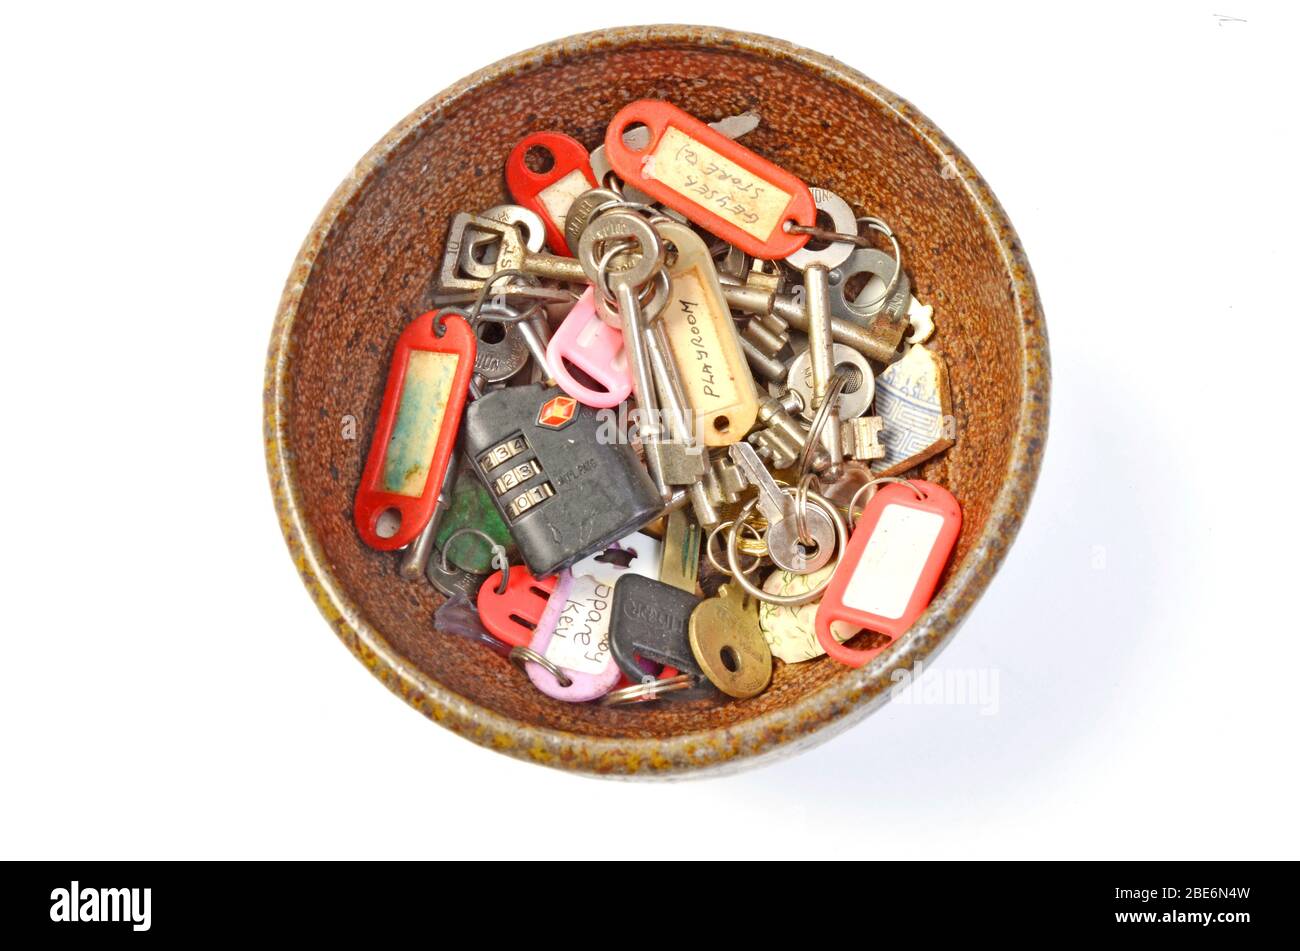 collection of old household keys and bric a brac Stock Photo